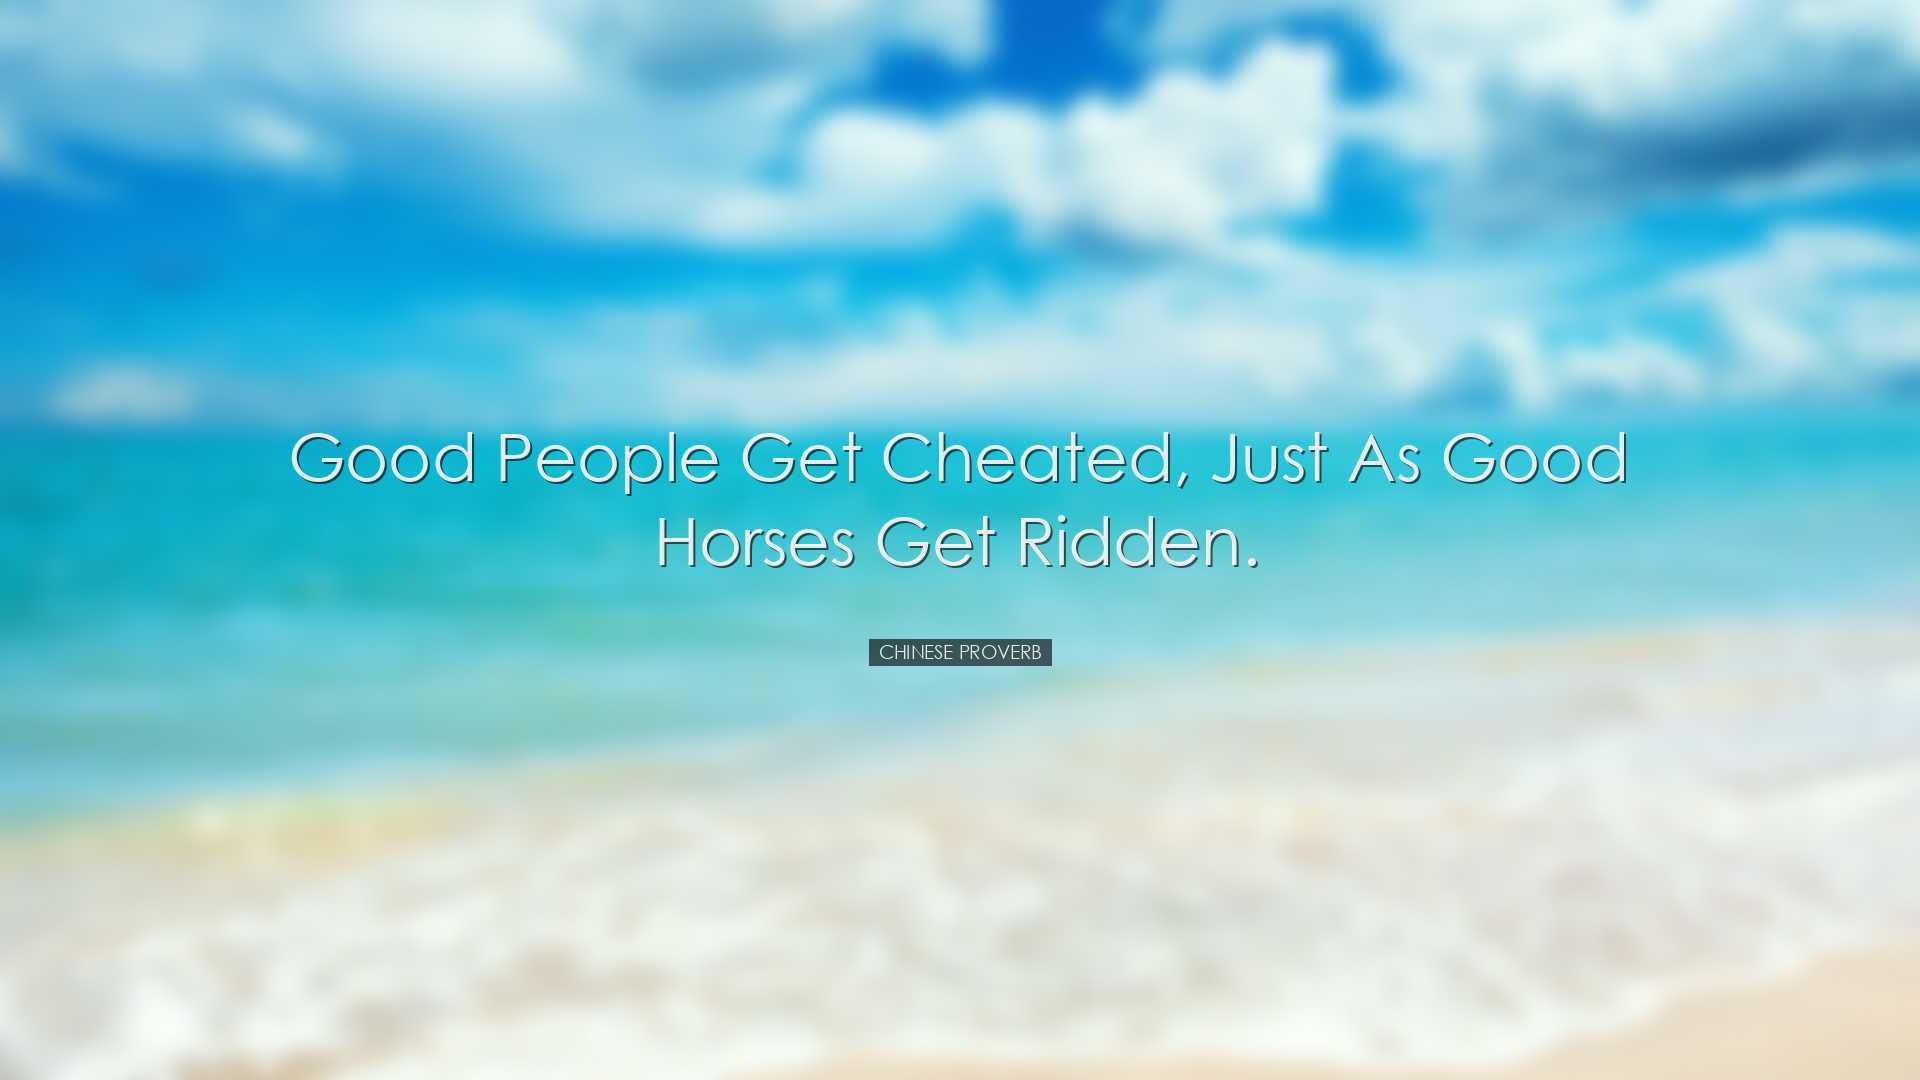 Good people get cheated, just as good horses get ridden. - Chinese